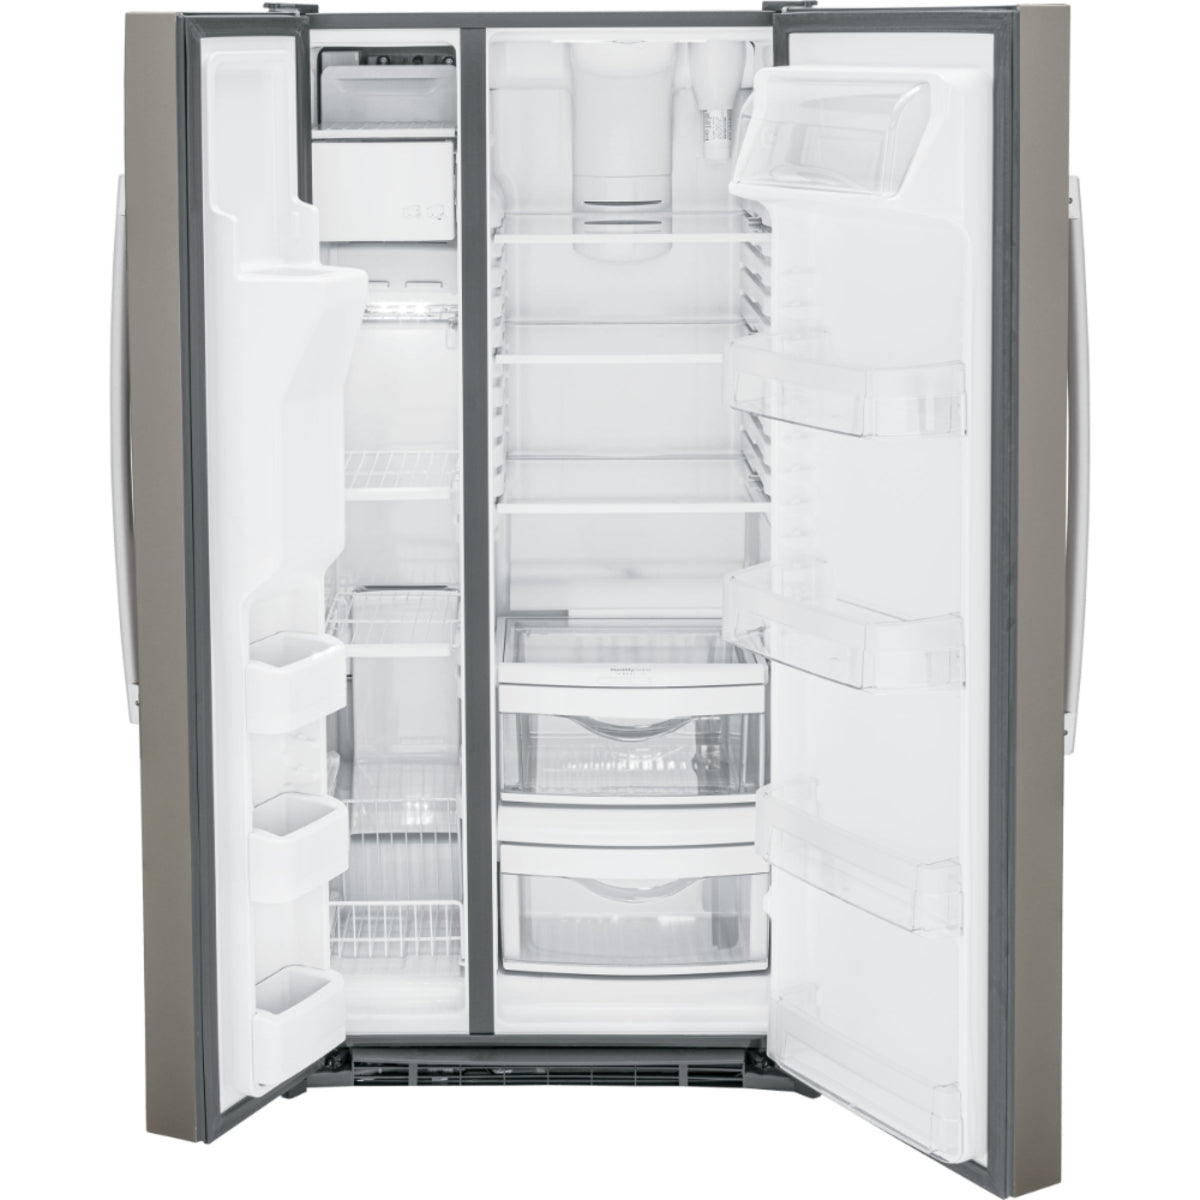 GE - 32.75 Inch 23 cu. ft Side by Side Refrigerator in Grey - GSS23GMPES